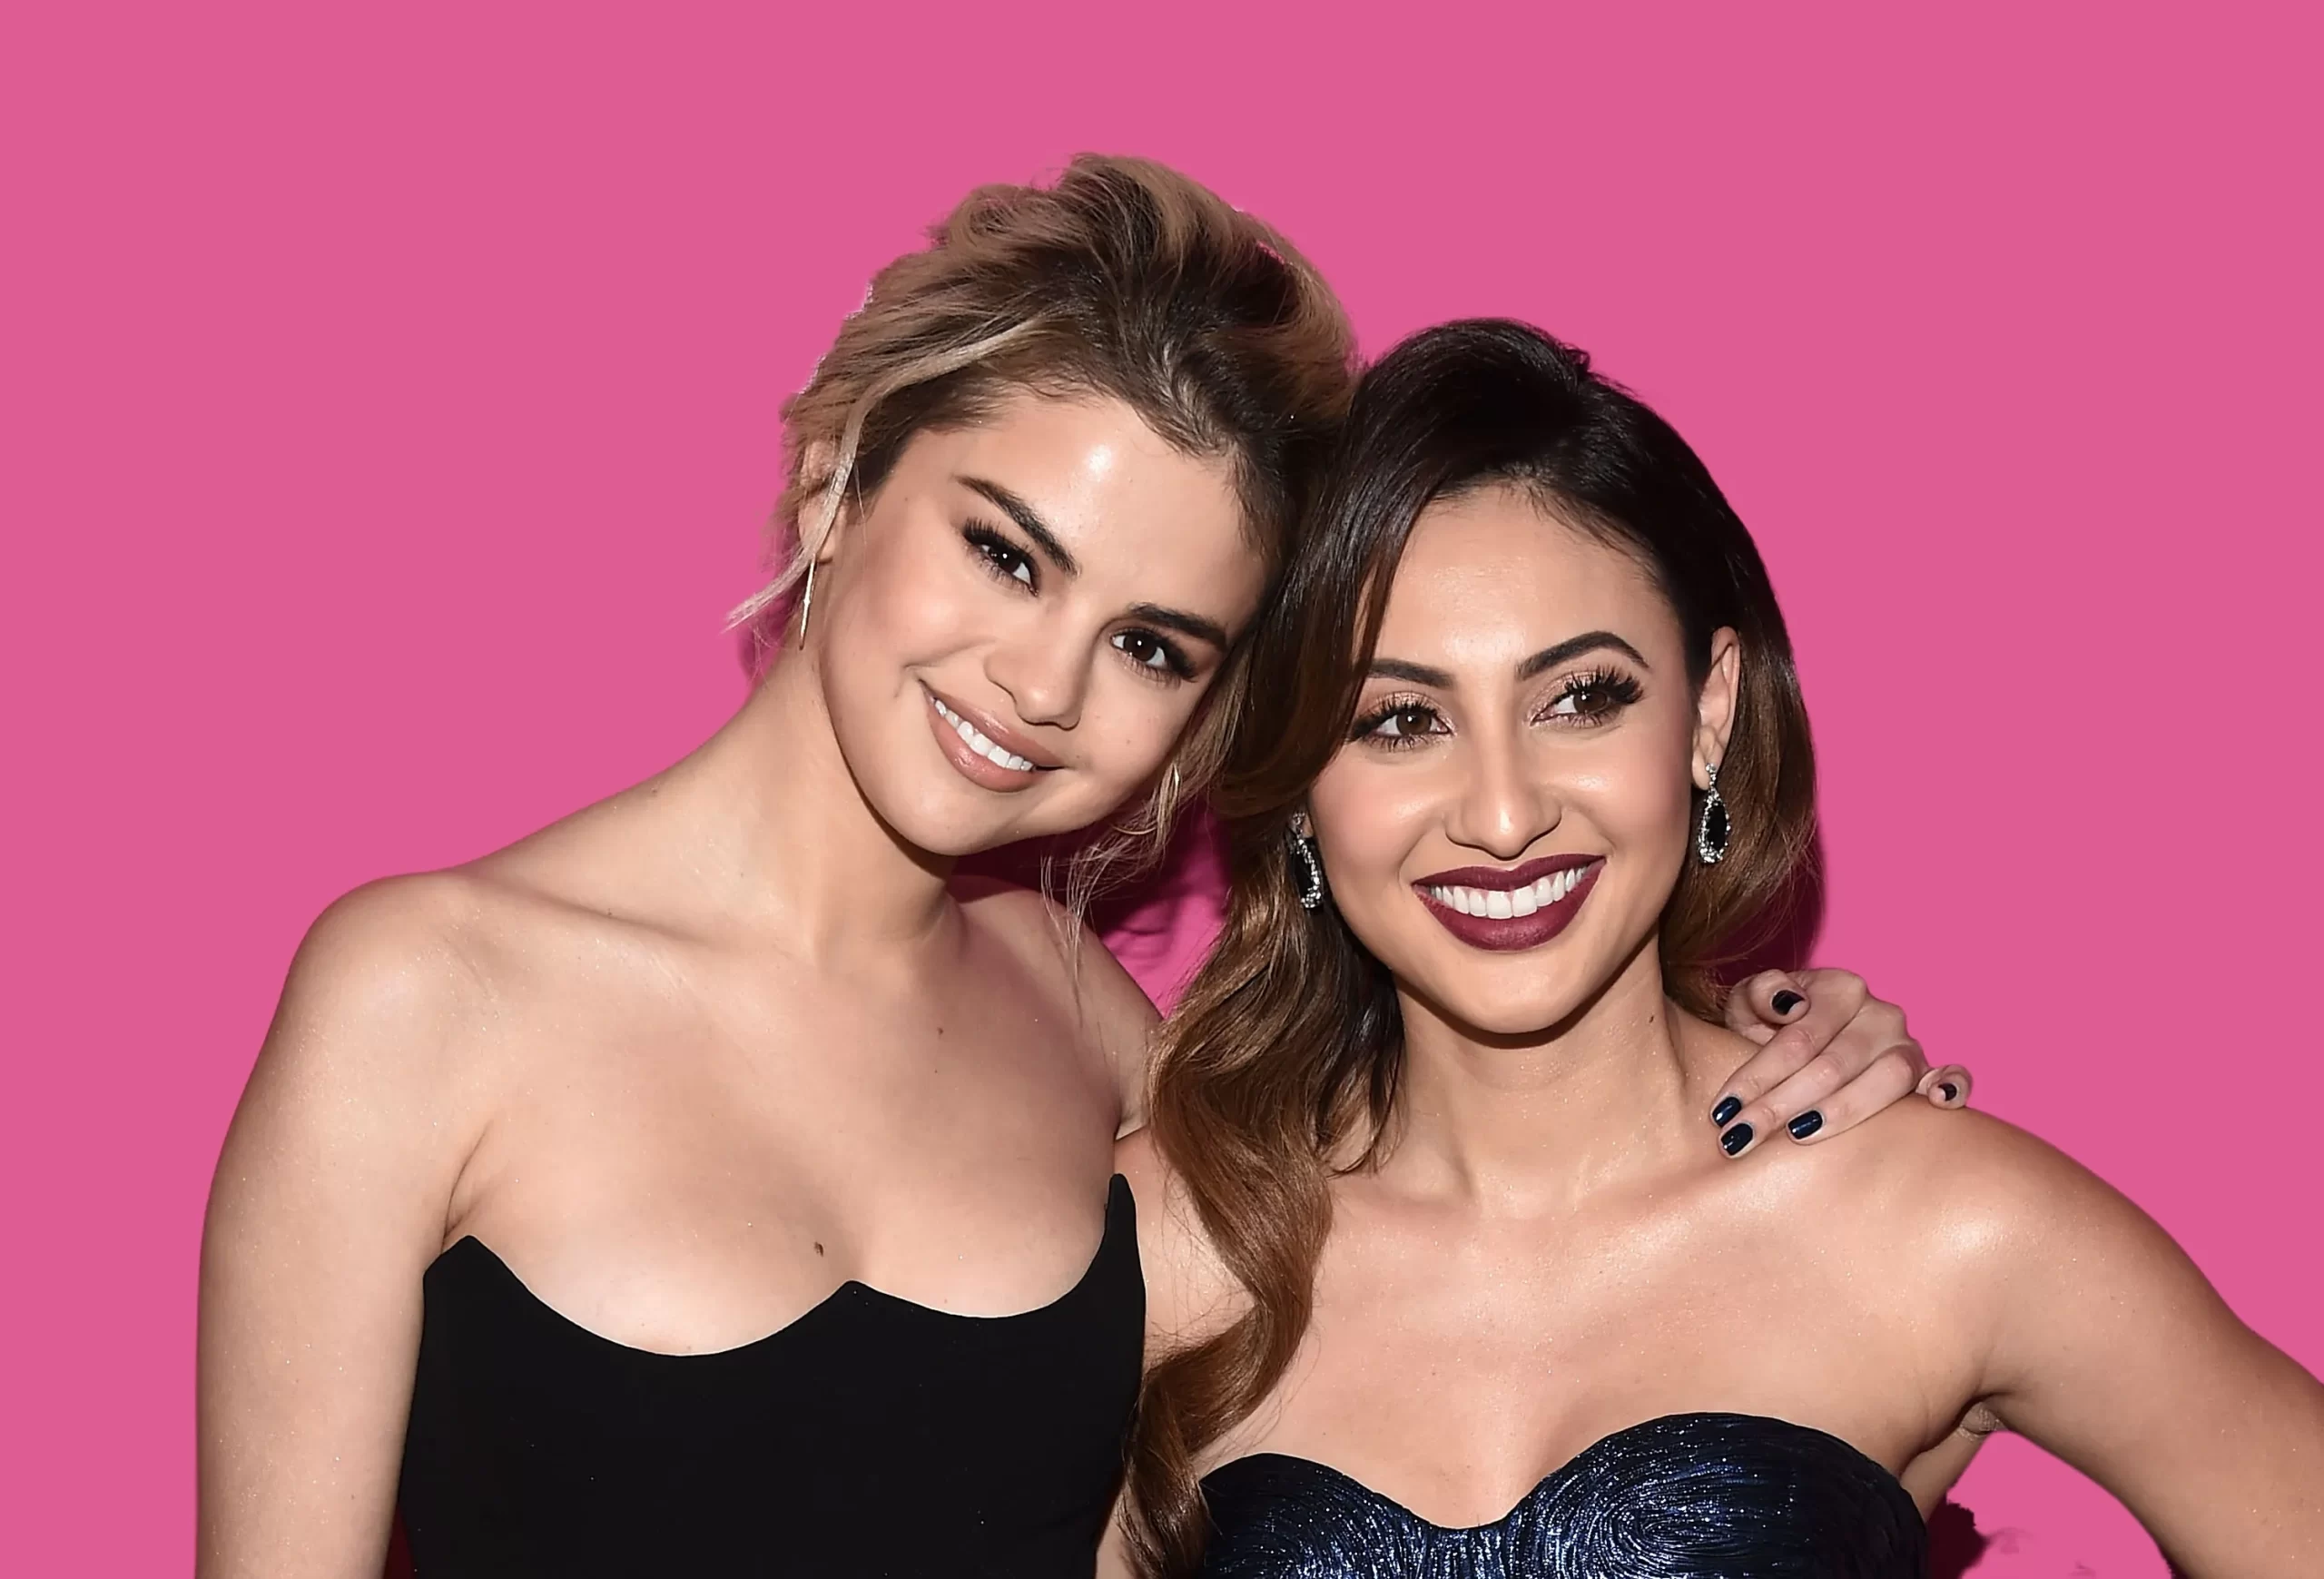 Is Selena Gomez And Francia Raisa’s Friendship In Trouble?